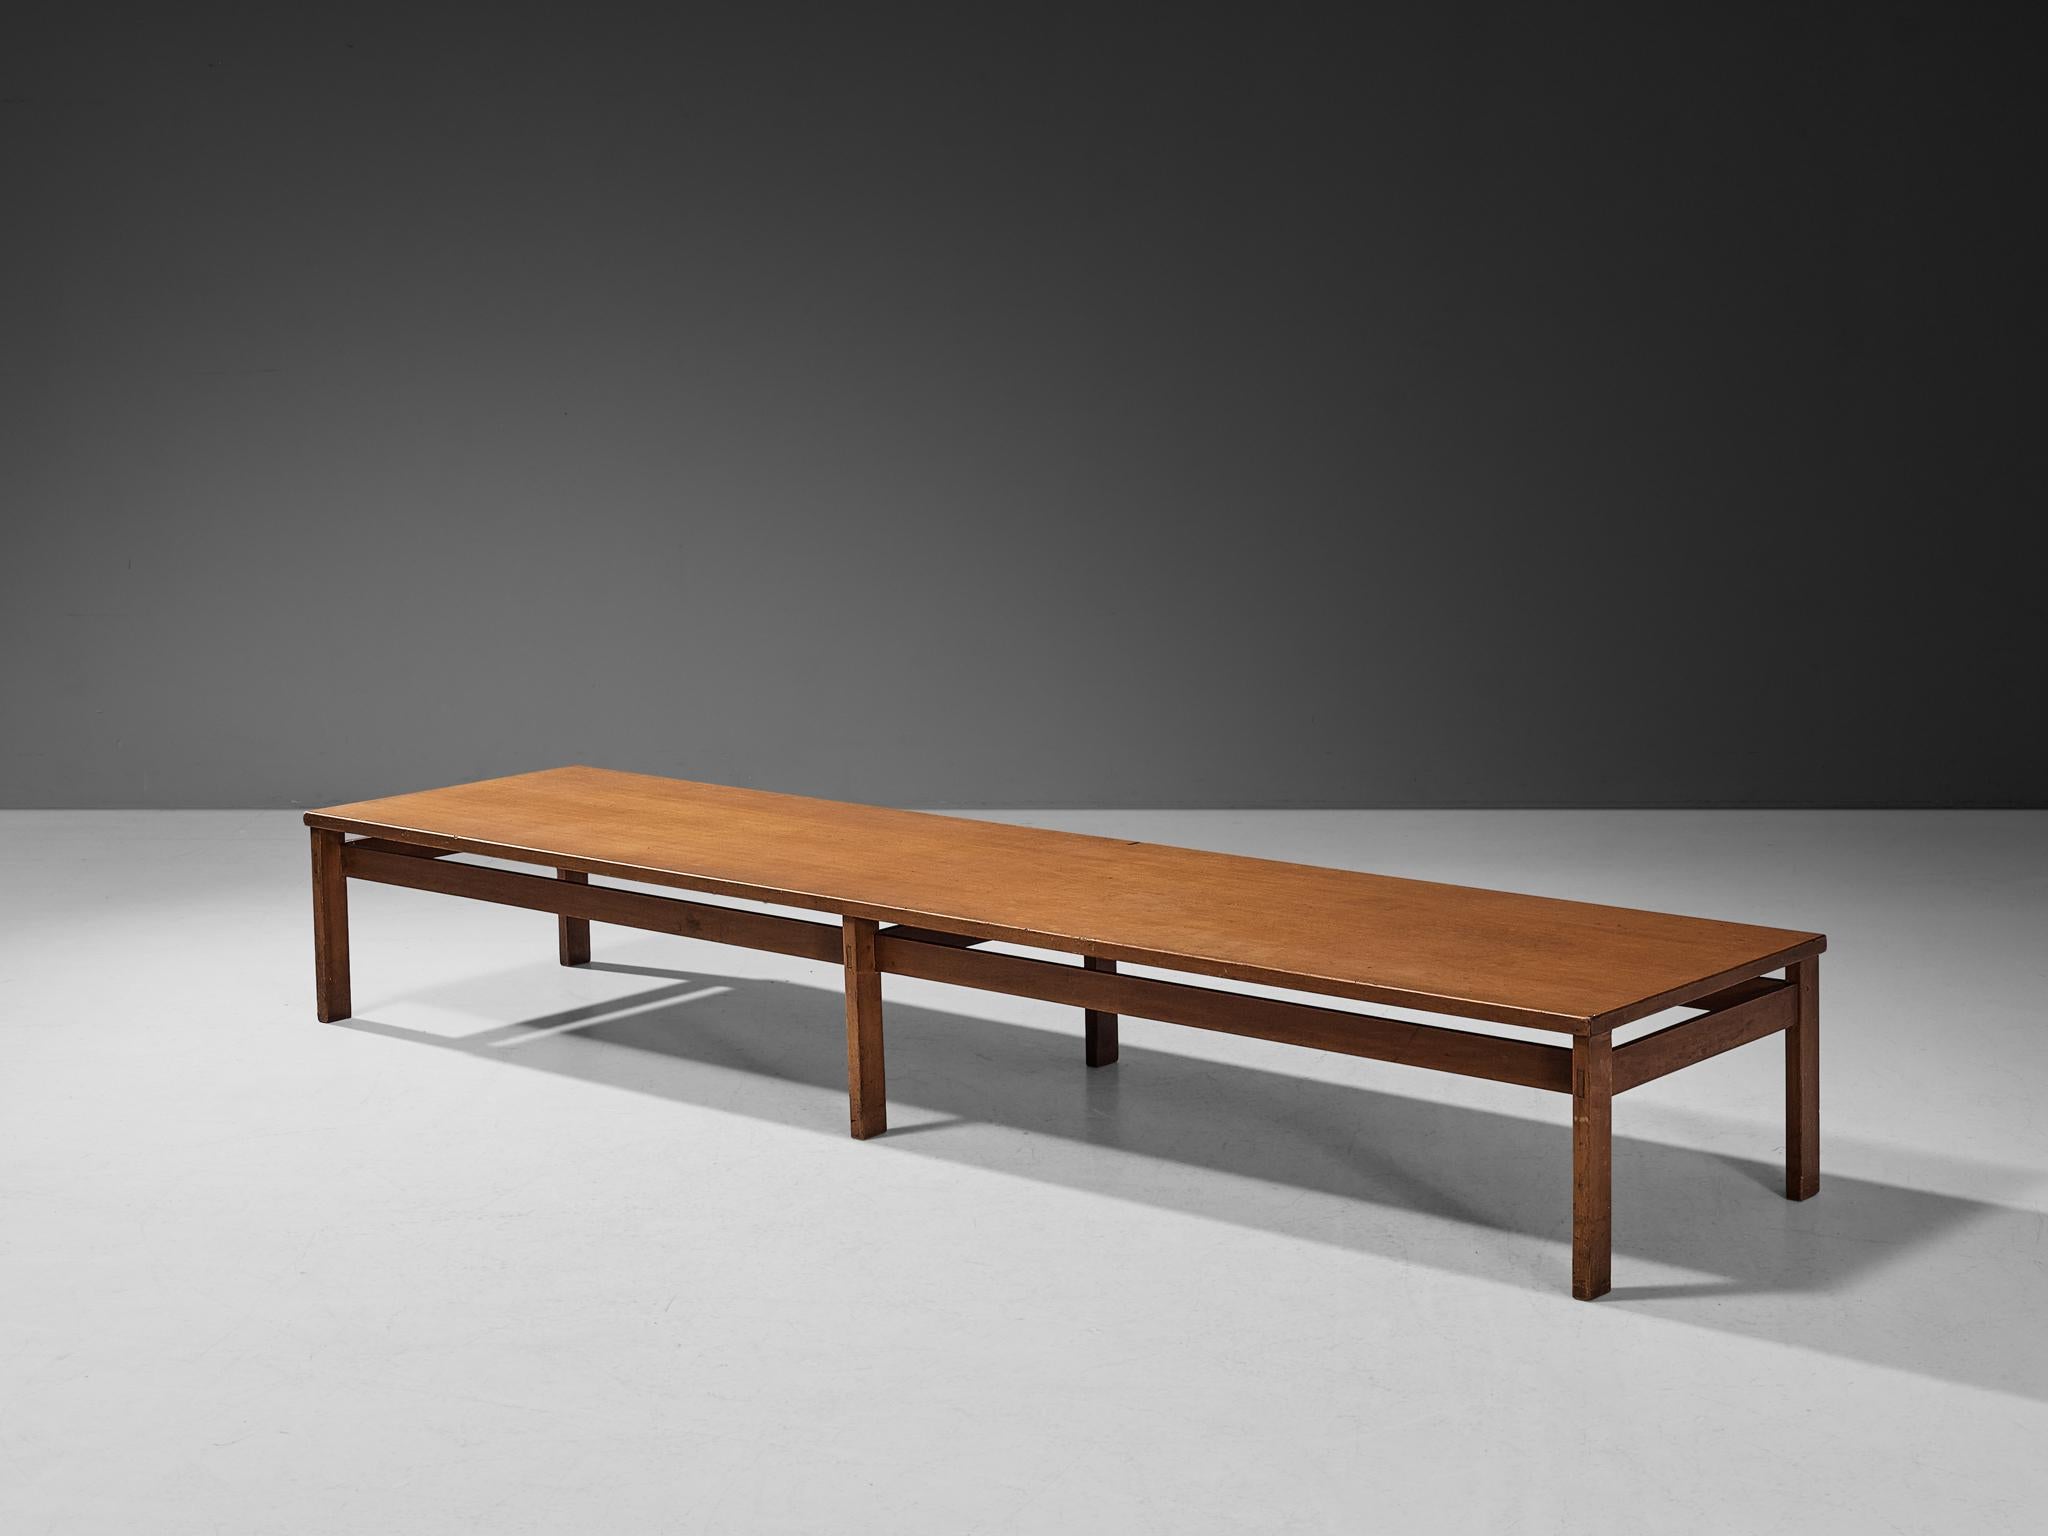 Gianfranco Frattini for Cantieri Carugati, large coffee table, walnut, Italy, 1950s

Beautiful coffee table in walnut by Italian designer Gianfranco Frattini. Besides its modest appearance, this table has an interesting design due to its width of